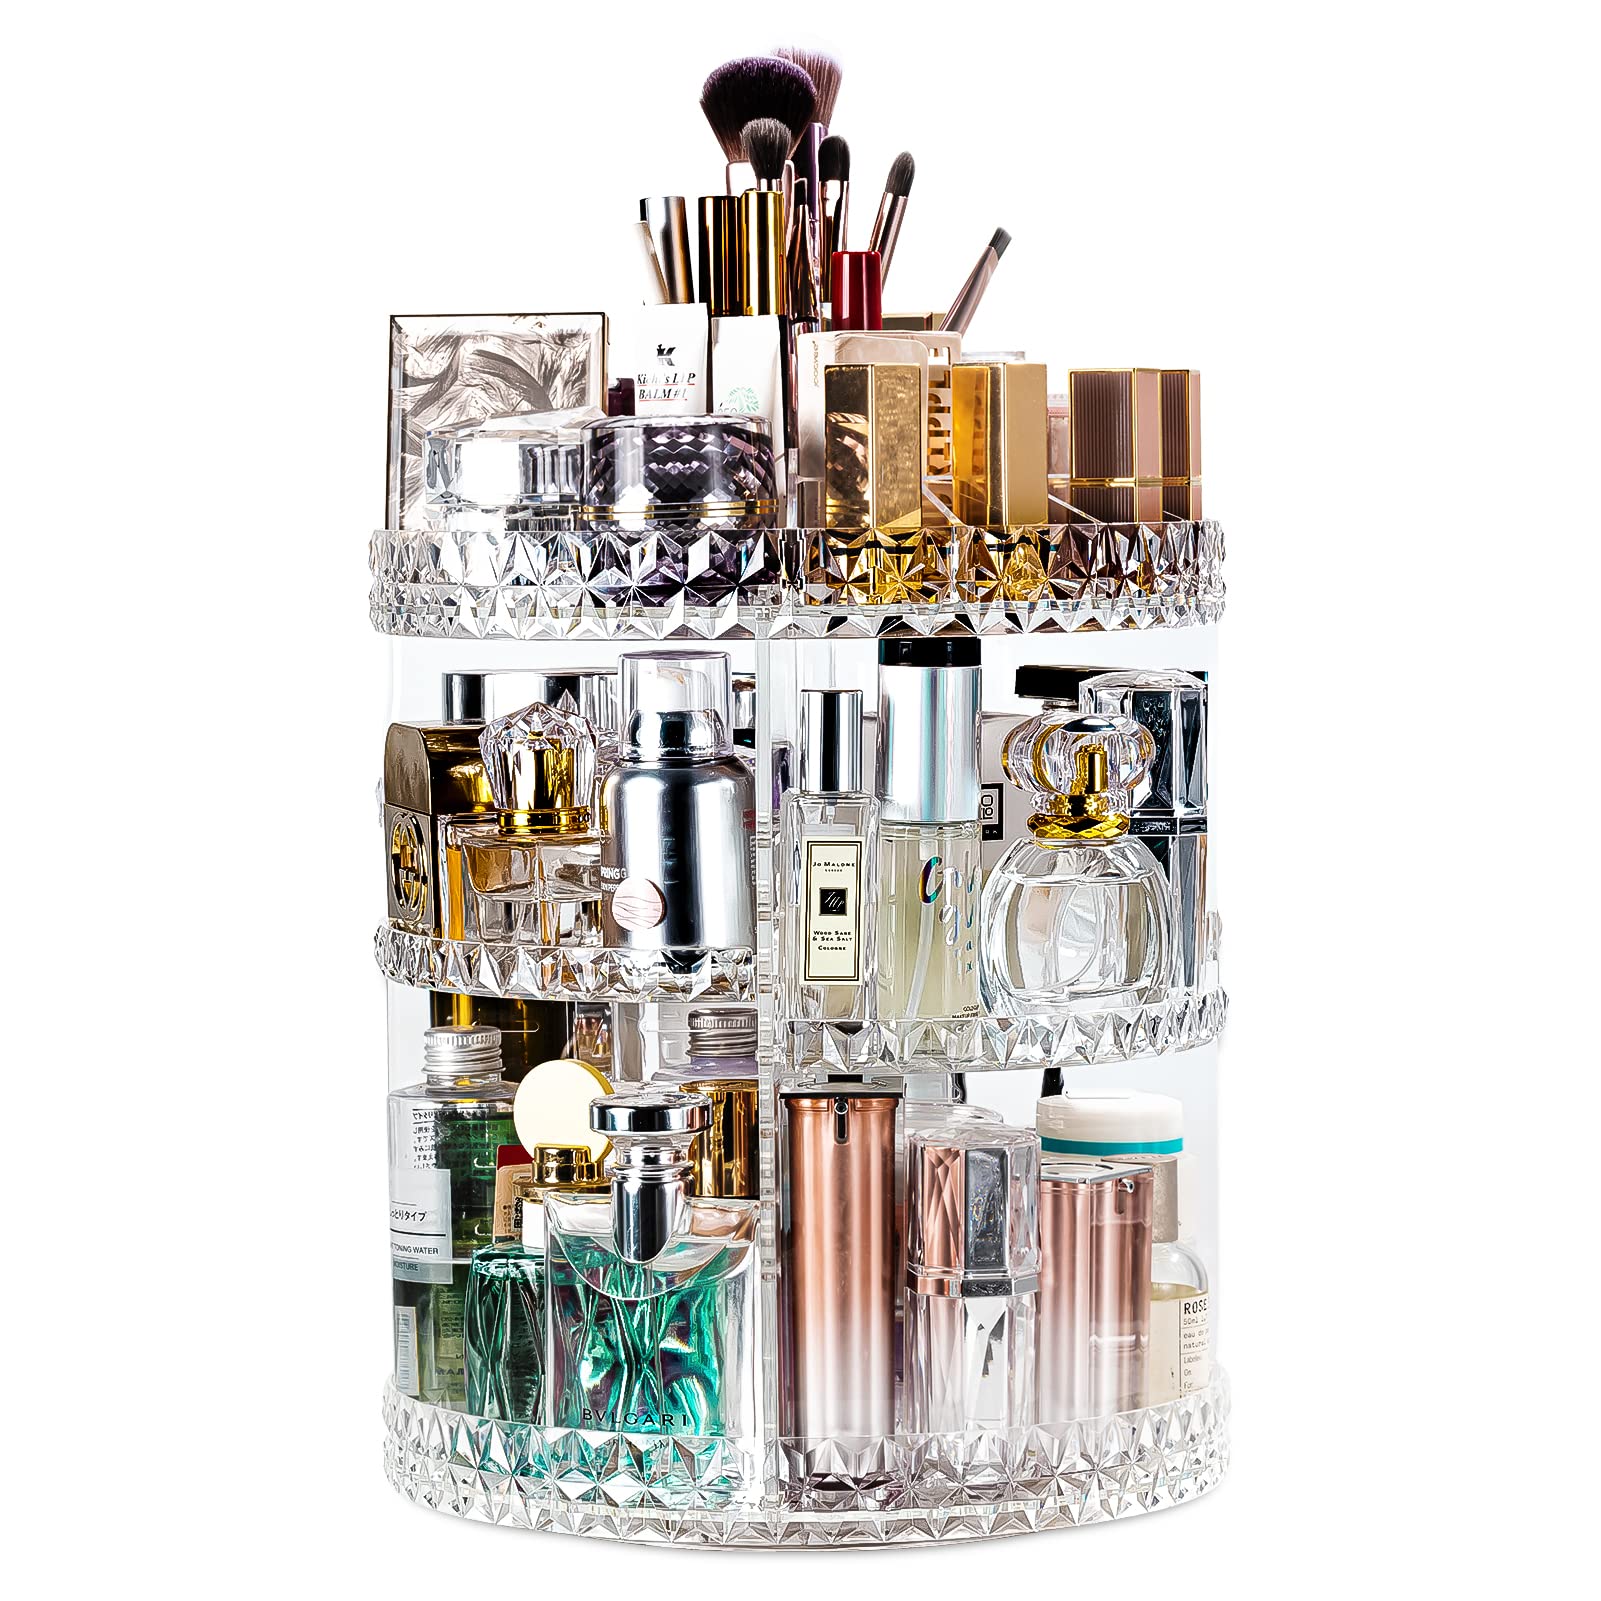 DreamGenius Makeup Organizer, 360 Degree Rotating Perfume Organizer, Adjustable Makeup organizers and storage with 8 Layers , Fits Makeup Brushes Lipsticks and Jewelry, Clear Acrylic